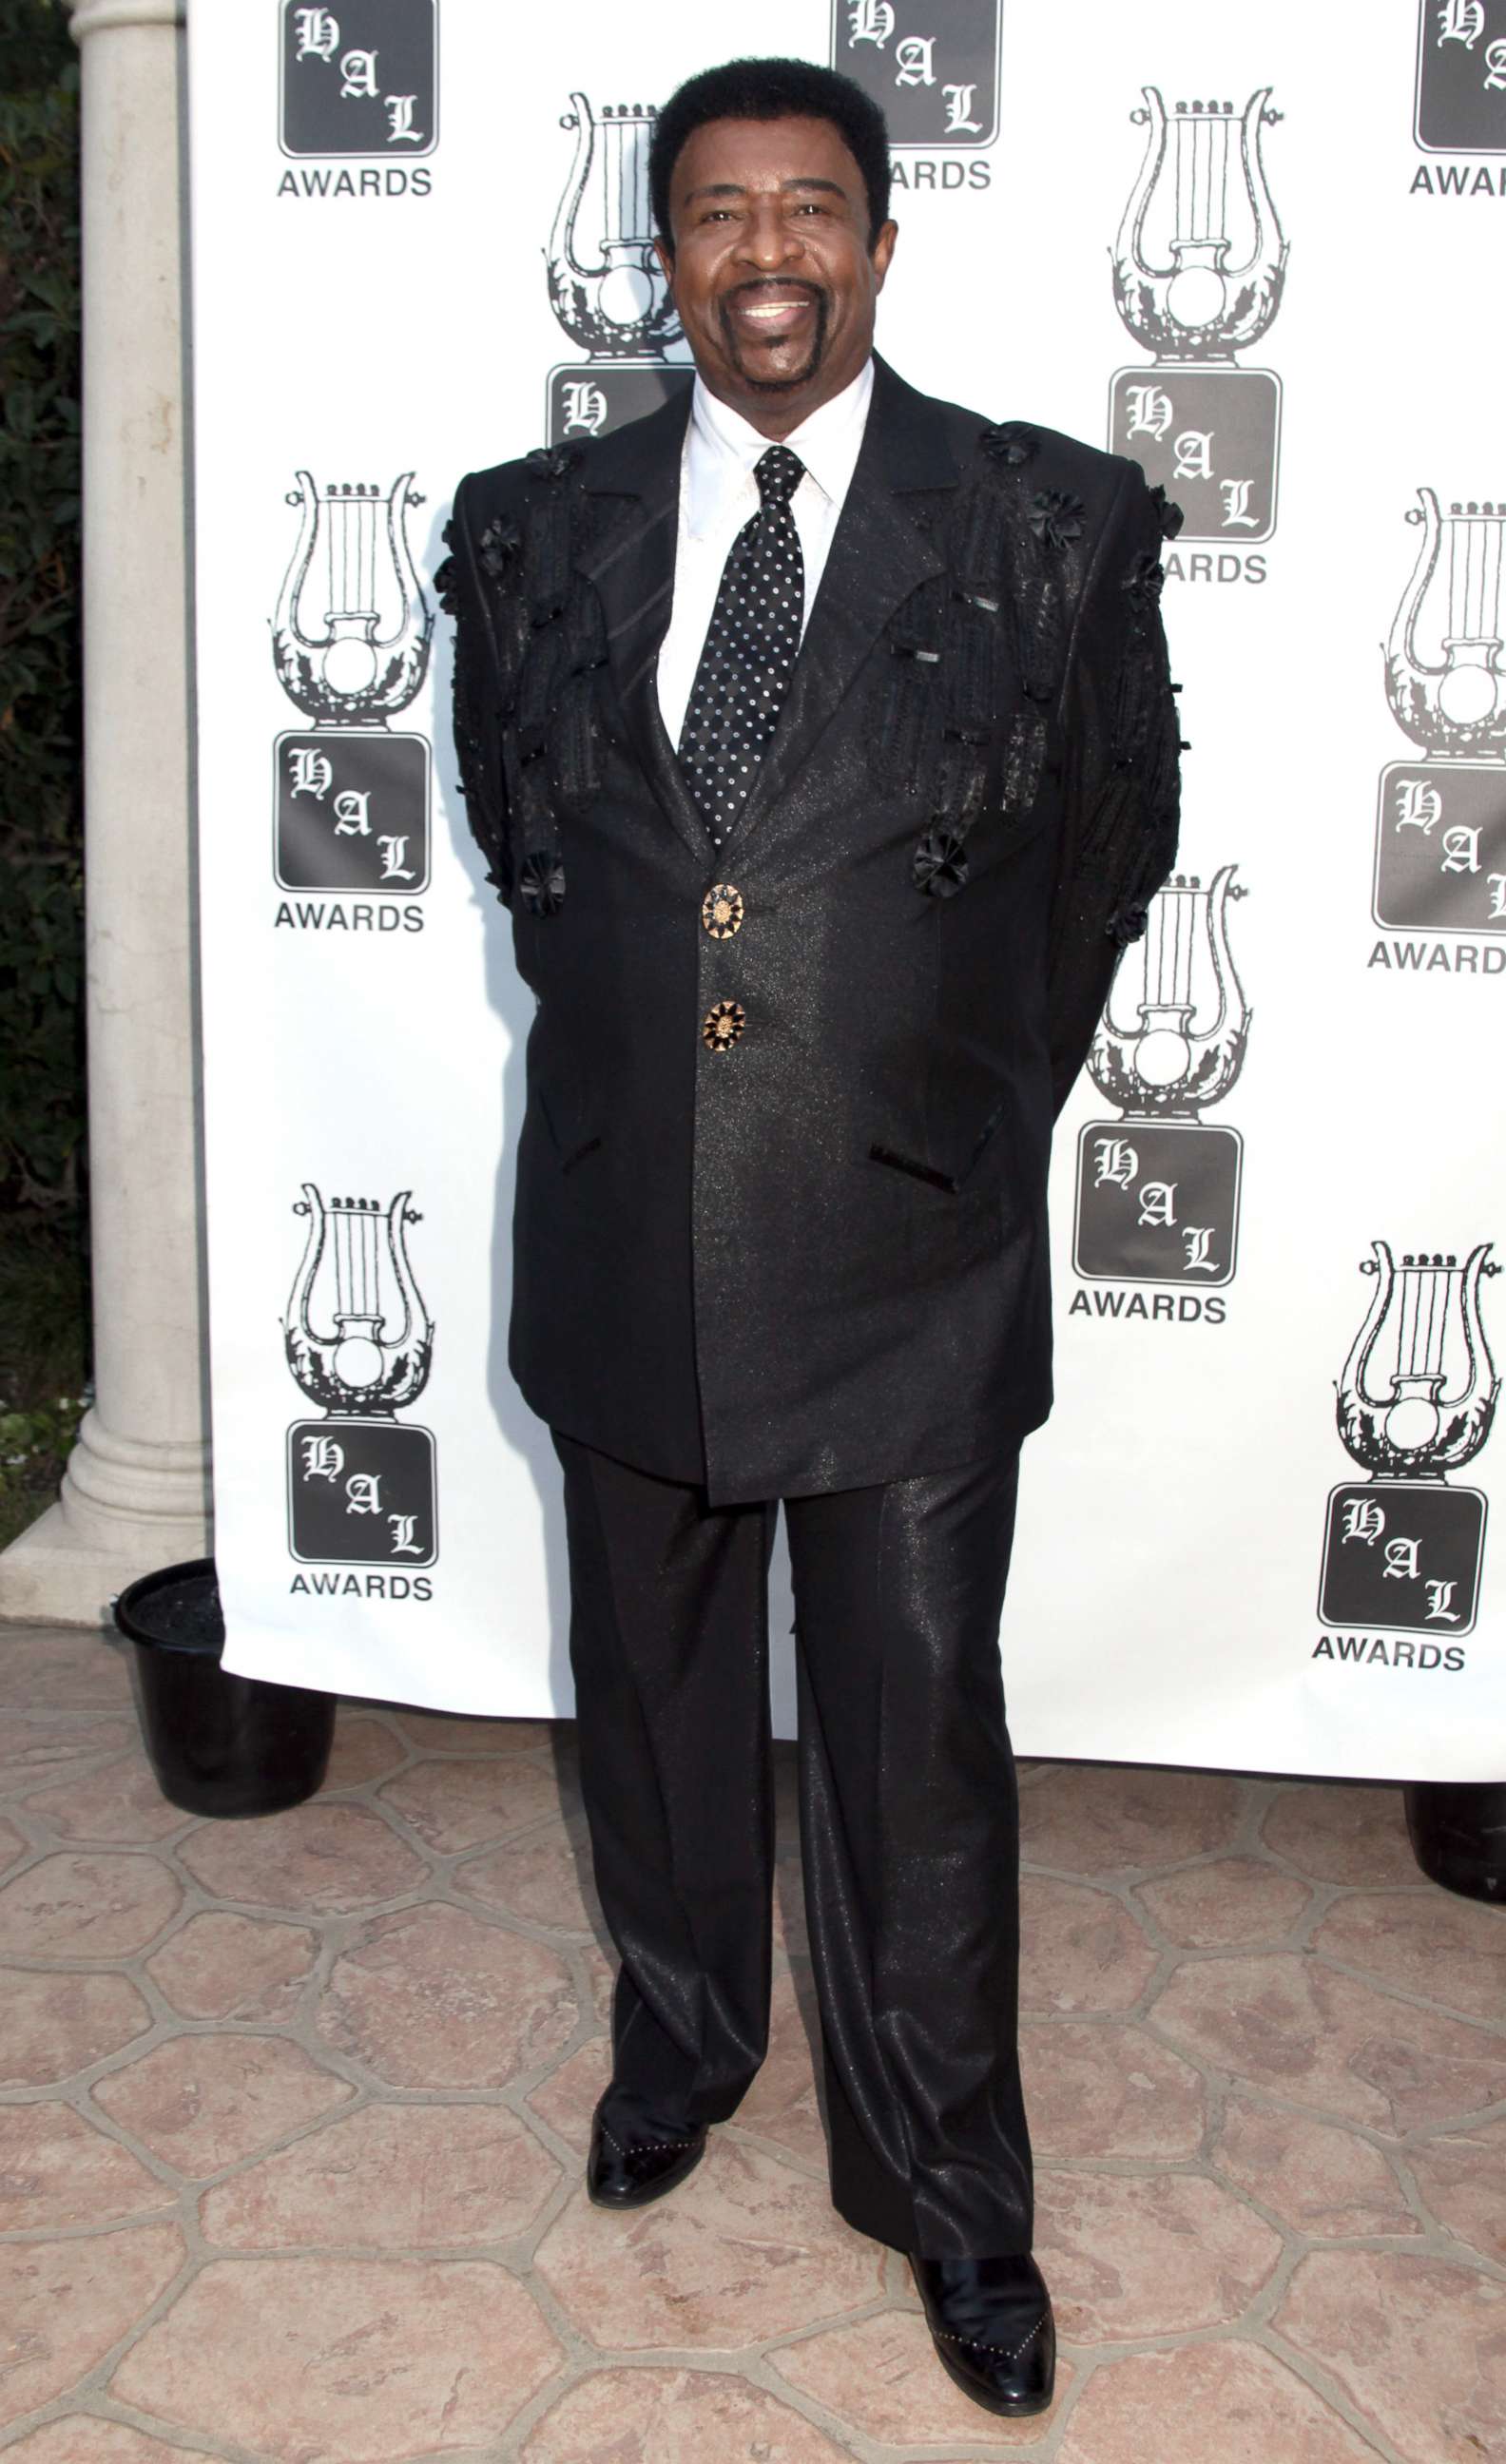 PHOTO: Dennis Edwards of The Temptations attends the 24th Annual Heroes And Legends Awards at Beverly Hills Hotel, Sept. 22, 2013, in Beverly Hills, Calif.  